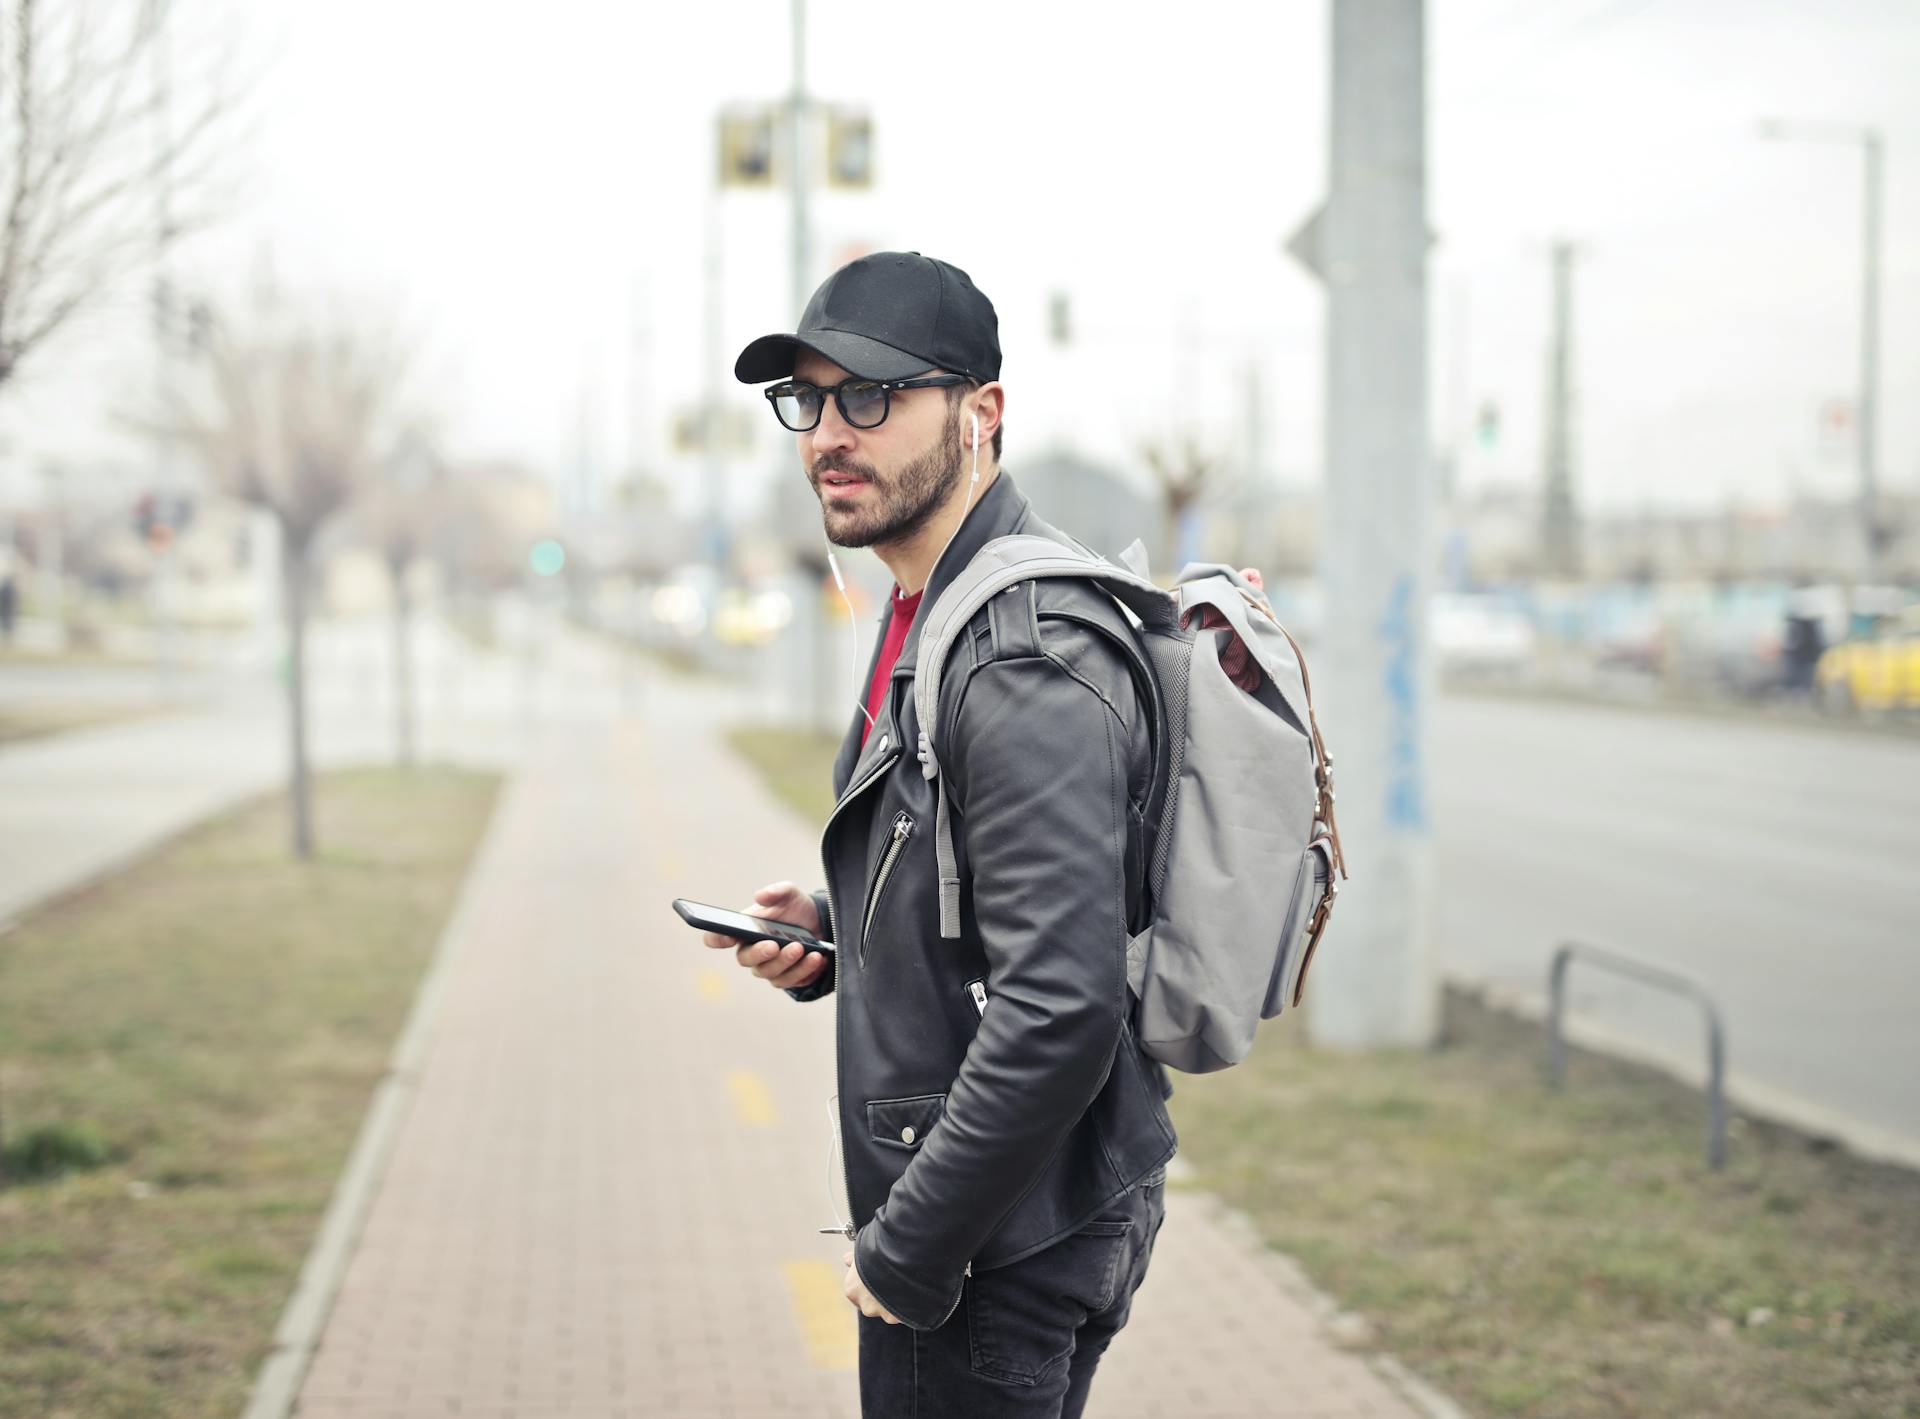 A man in a black jacket and a backpack holding a phone while walking on the sidewalk | Source: Pexels